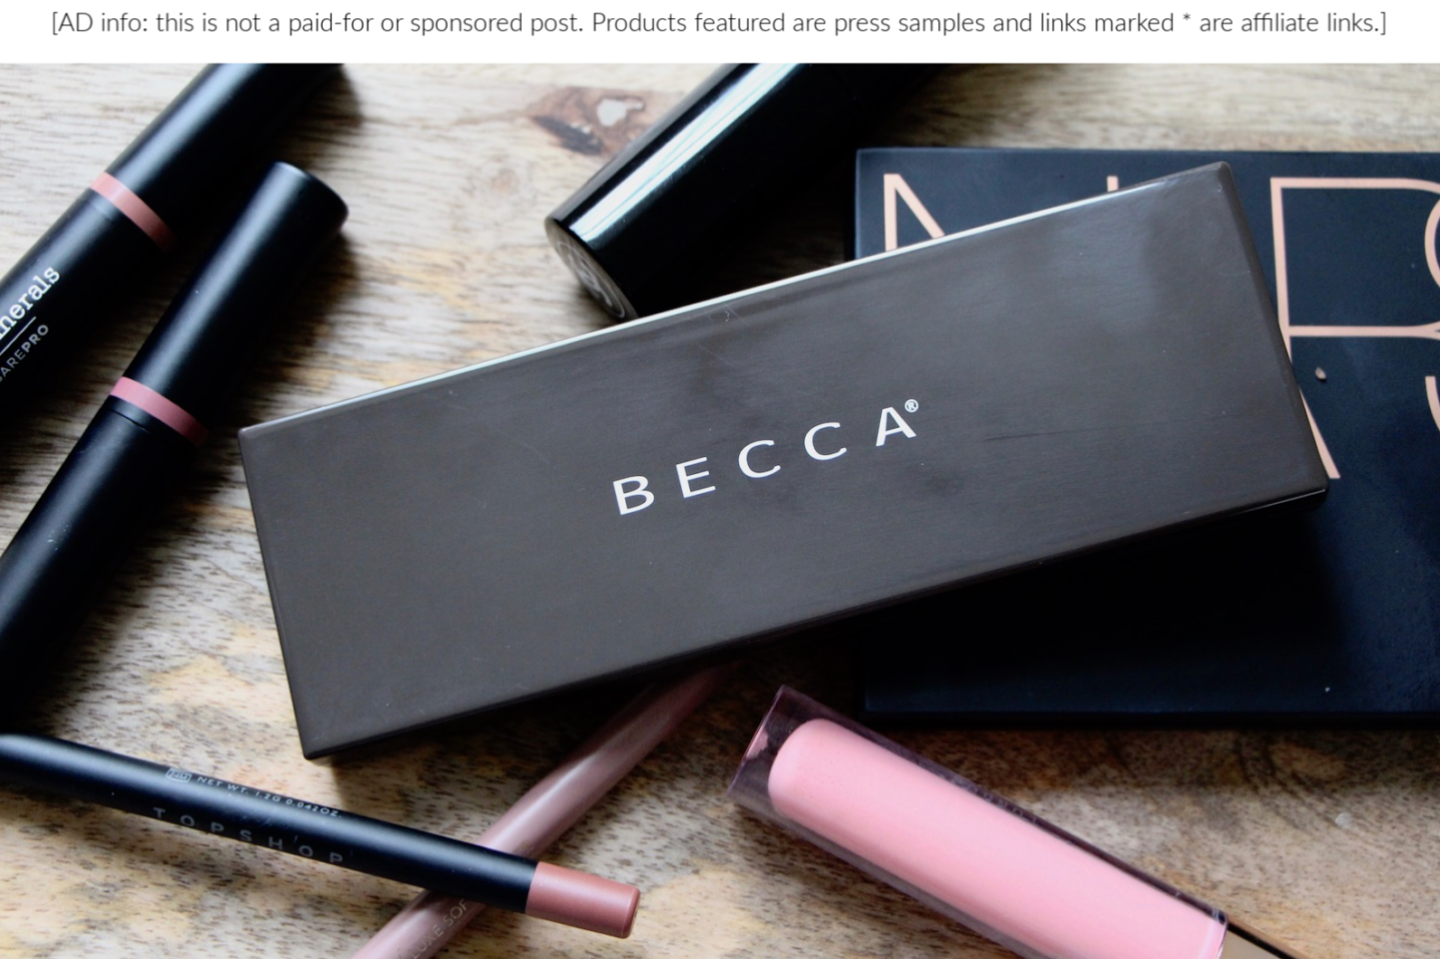 becca ombre nudes palette review